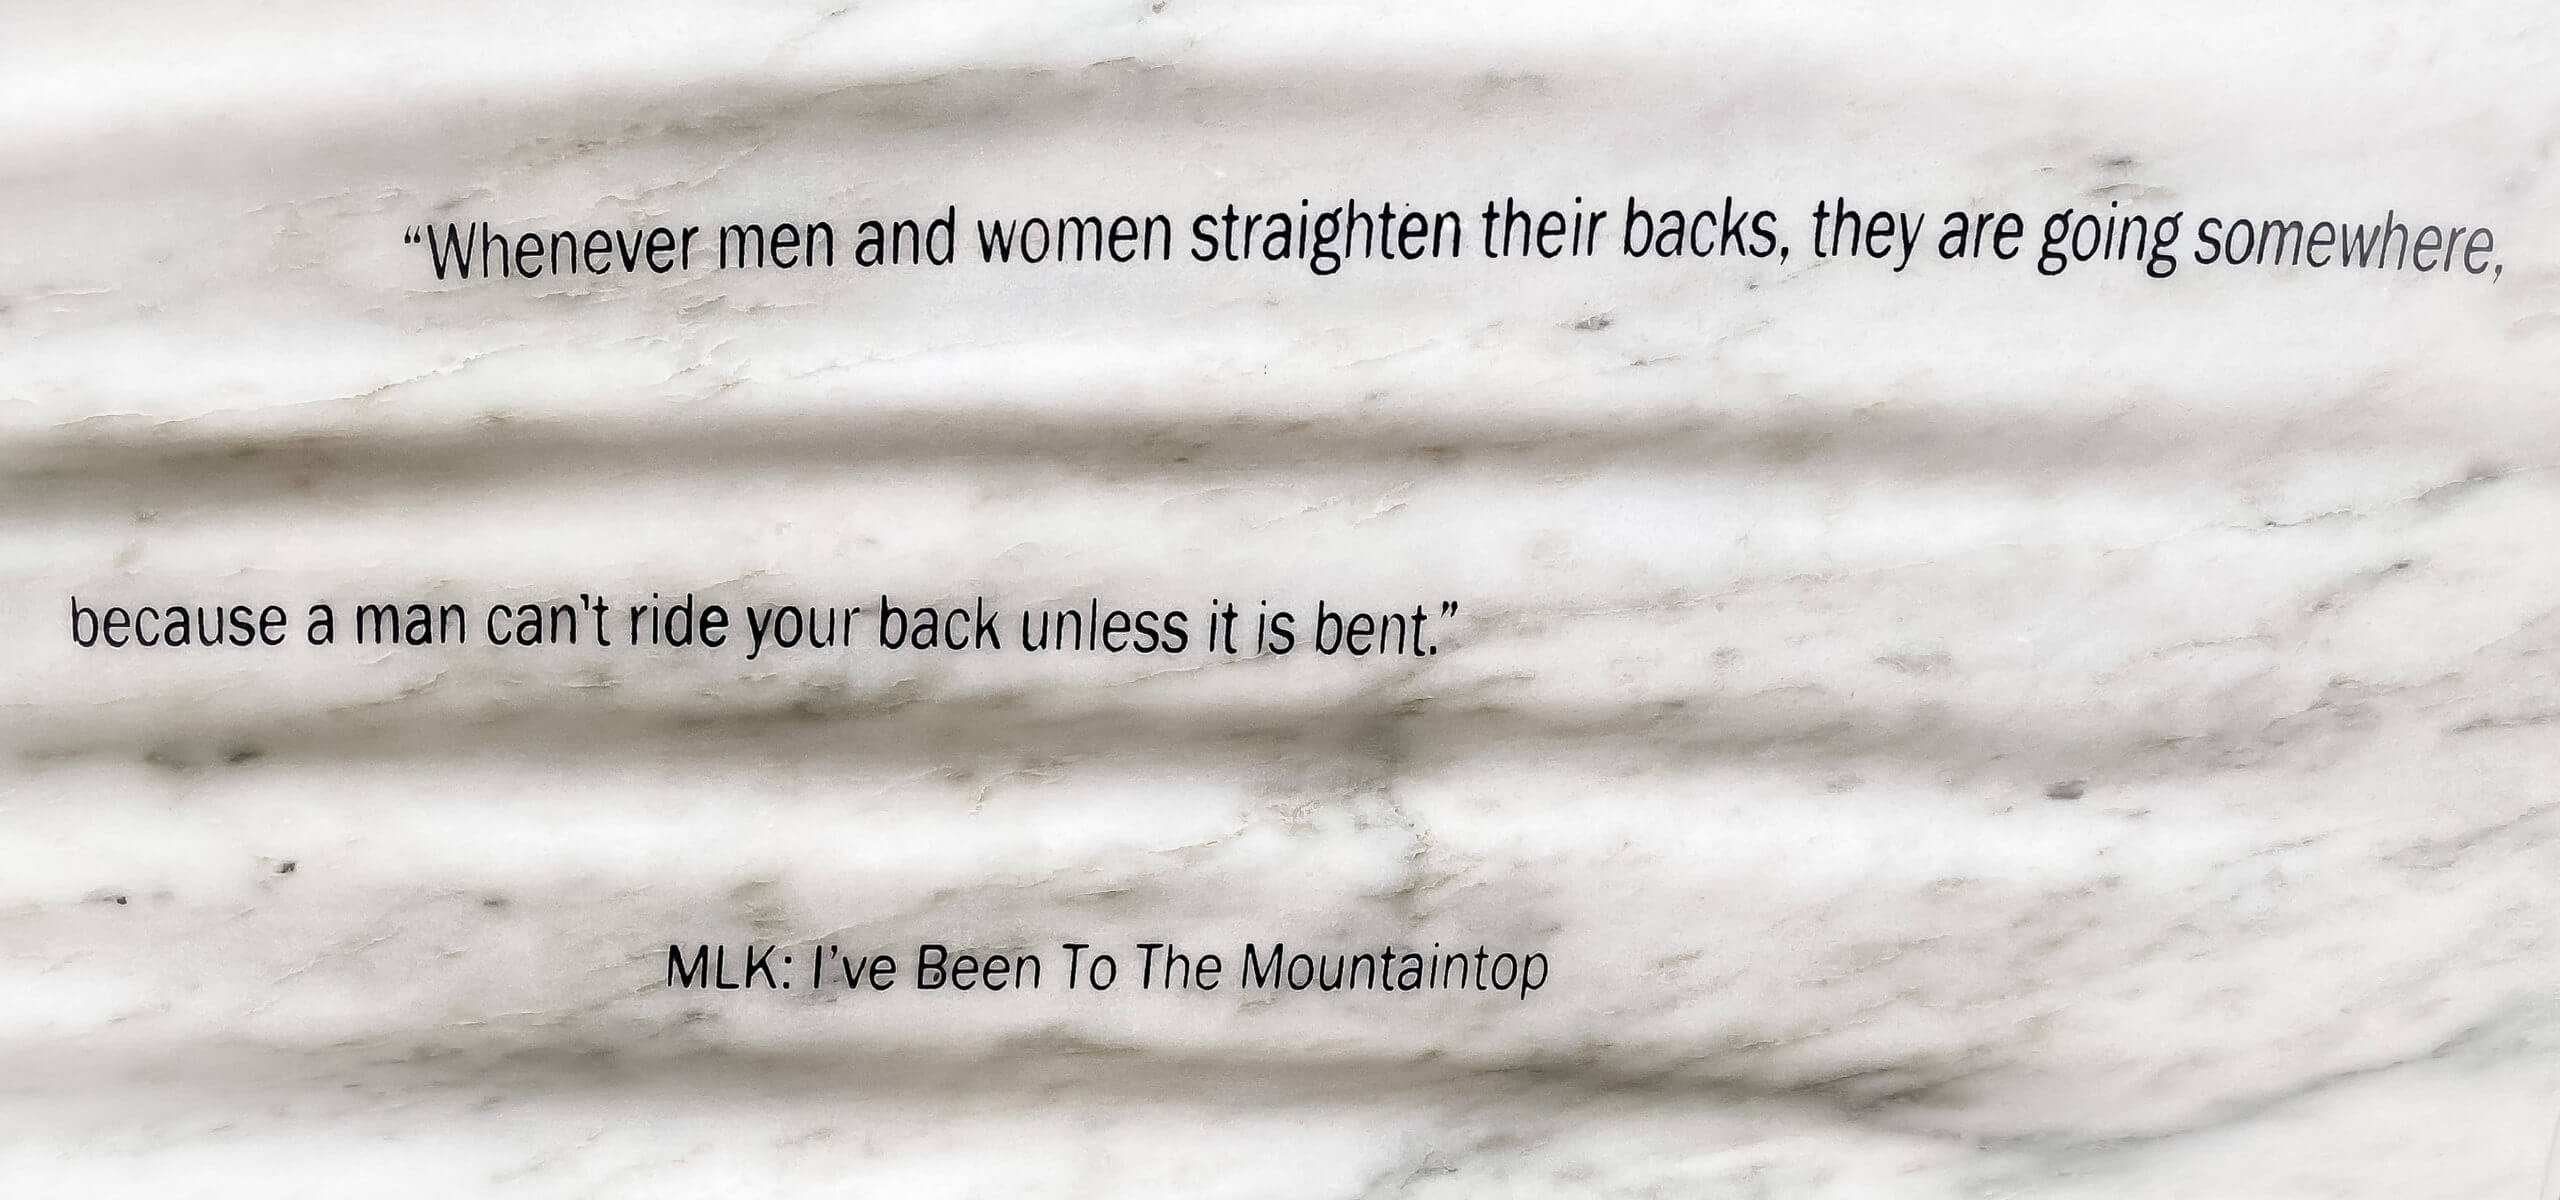 Lines of text from I've Been to the Mountaintop by MLK, the quote reads, "Whenever men and women straighten their backs, they are going somewhere, because a man can't ride your back unless it is bent."